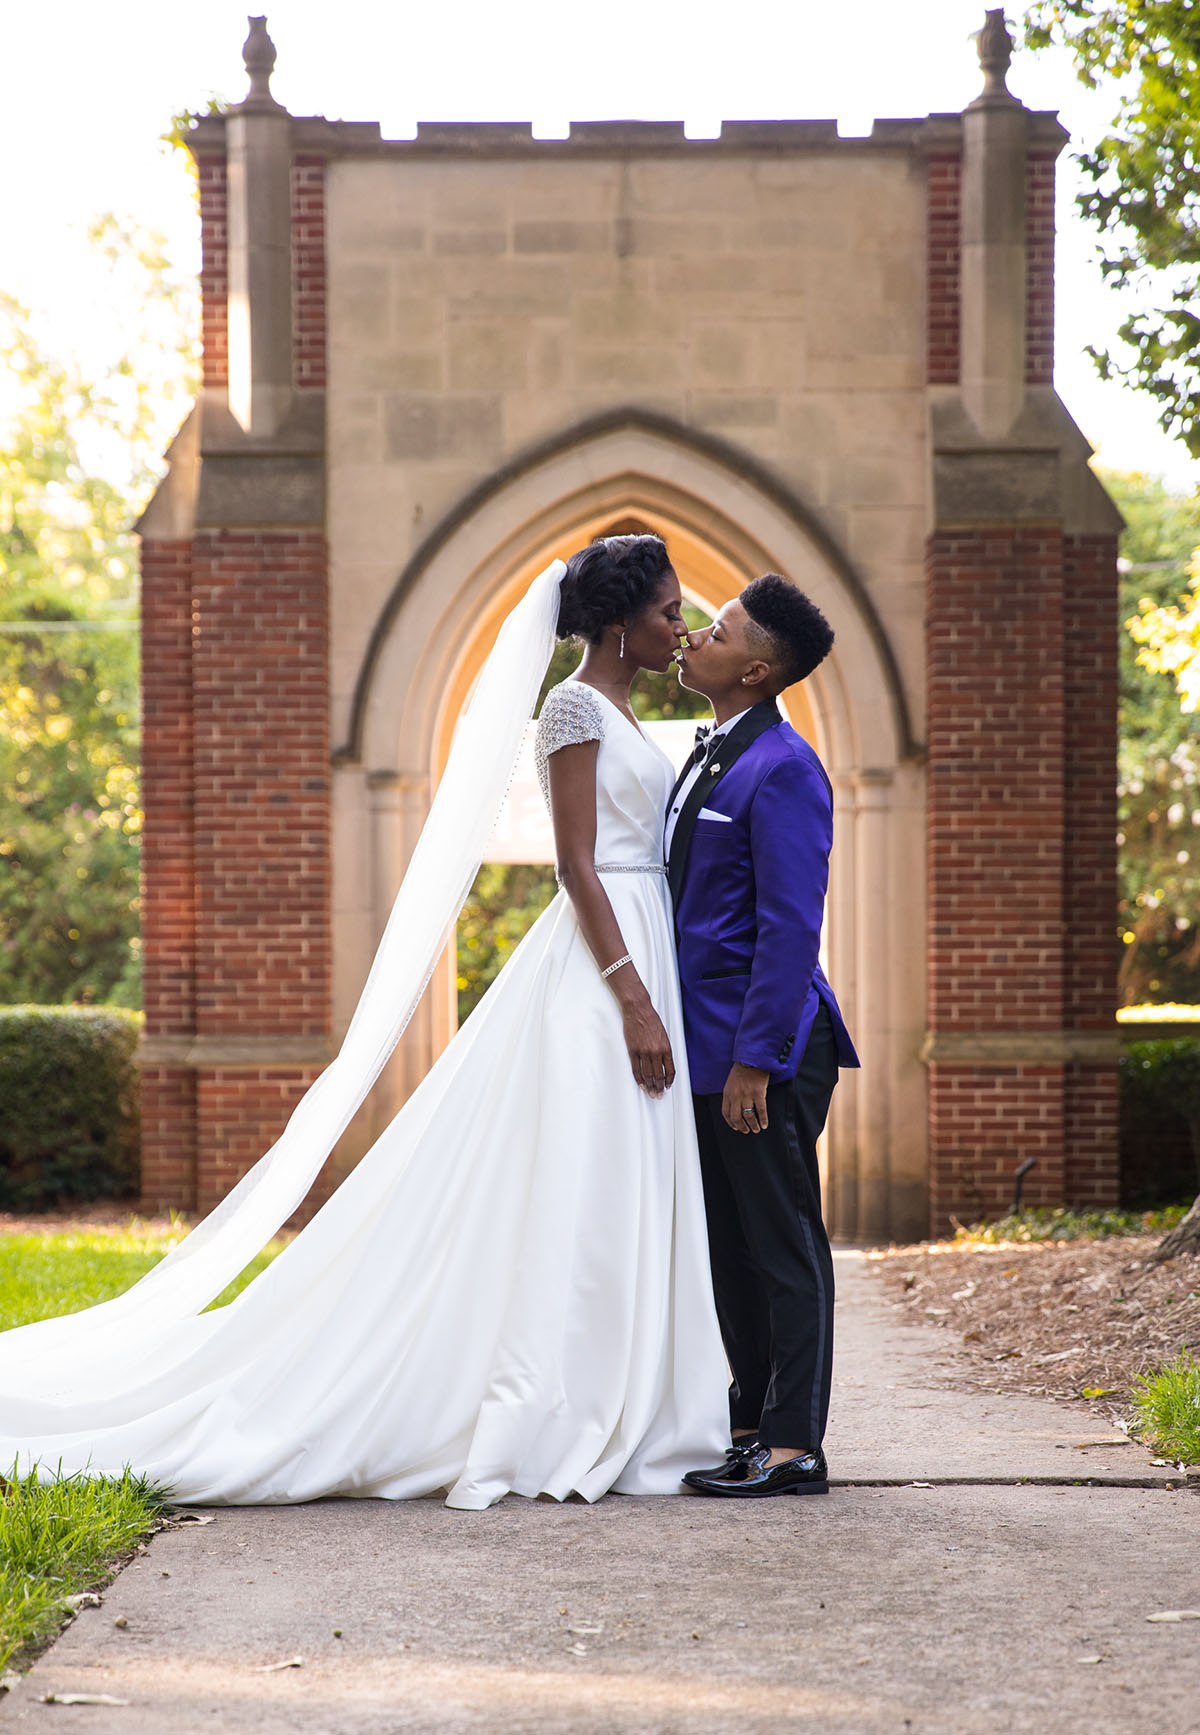 Southern traditional chapel wedding two brides purple tuxedo long white dress church God religious cultural traditions kiss